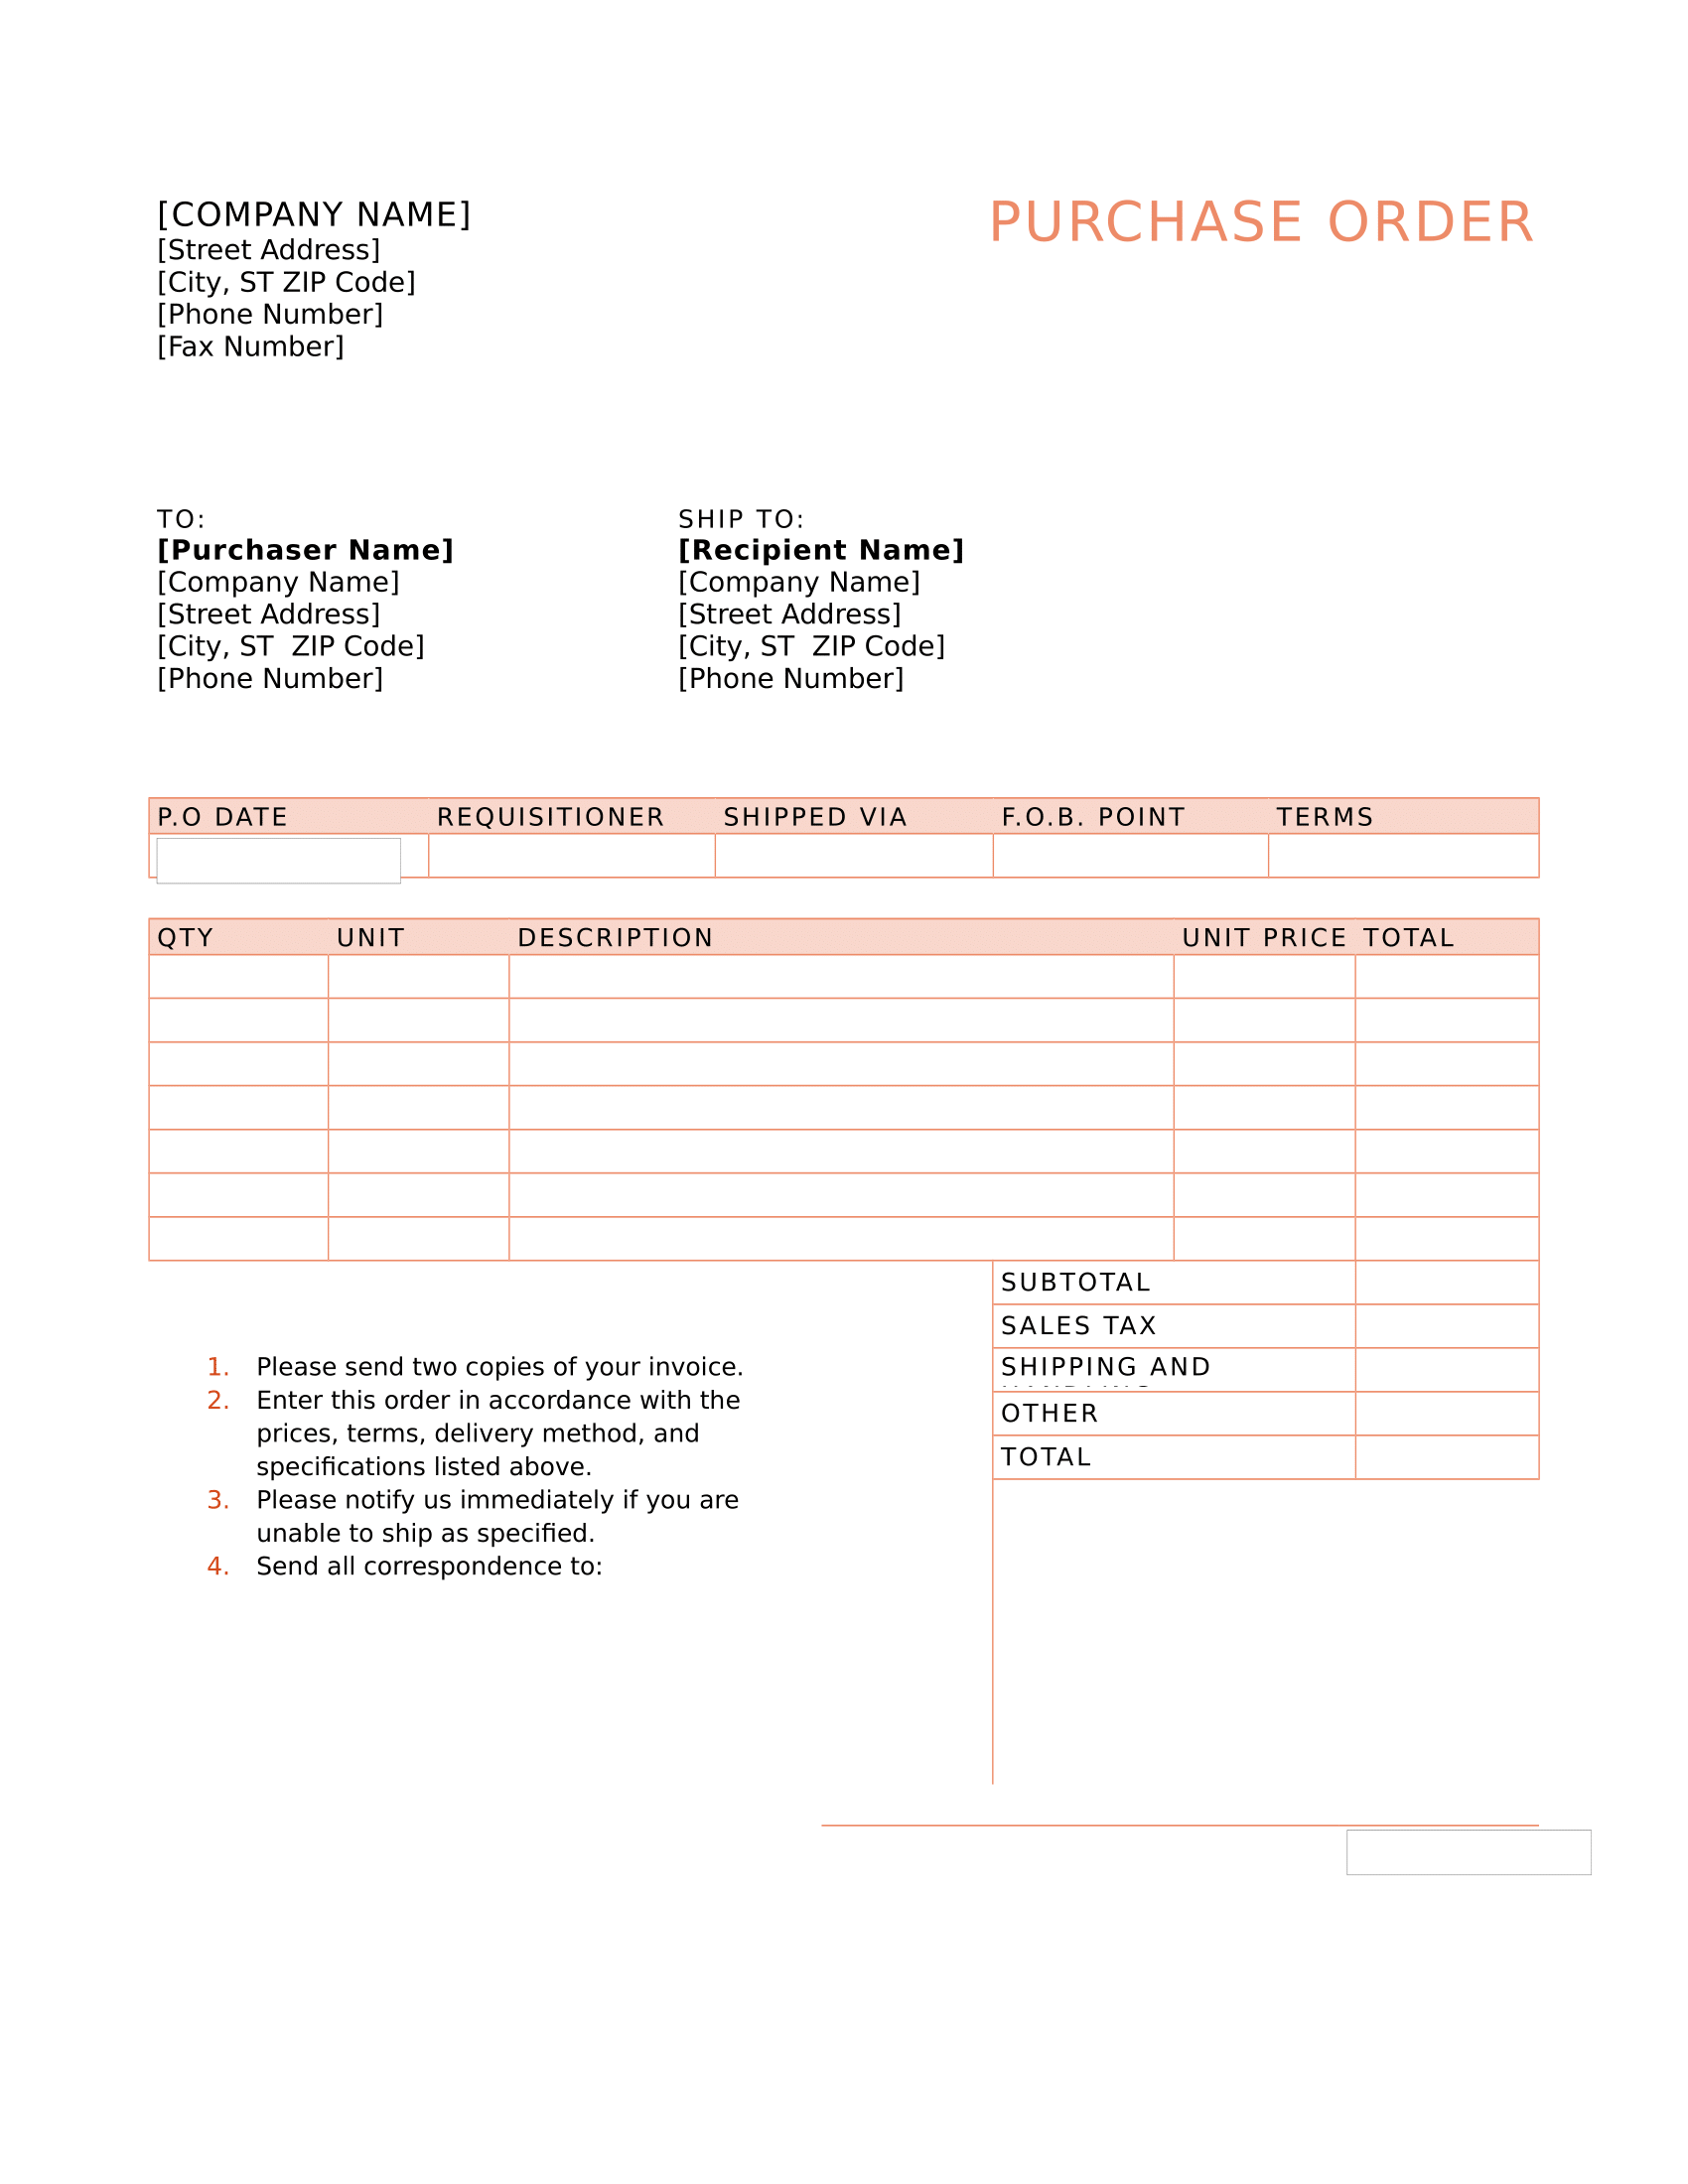 Purchase Order Letter Format In Word from officewriting.com